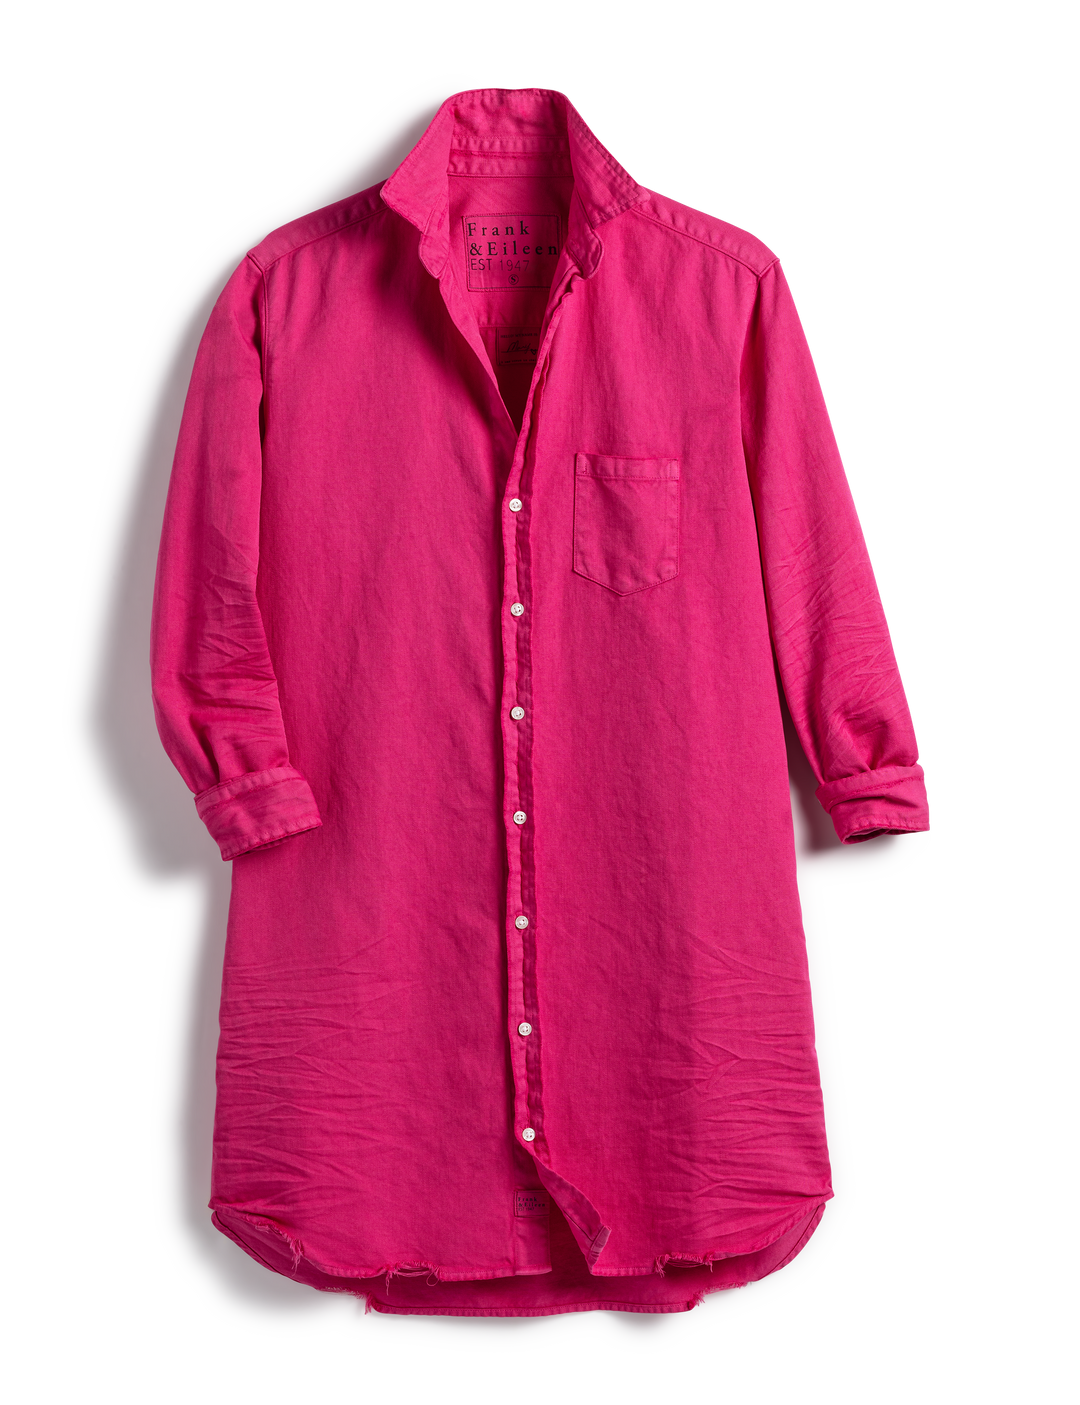 Frank & Eileen - Mary Woven Button Up Dress in Magenta Pink